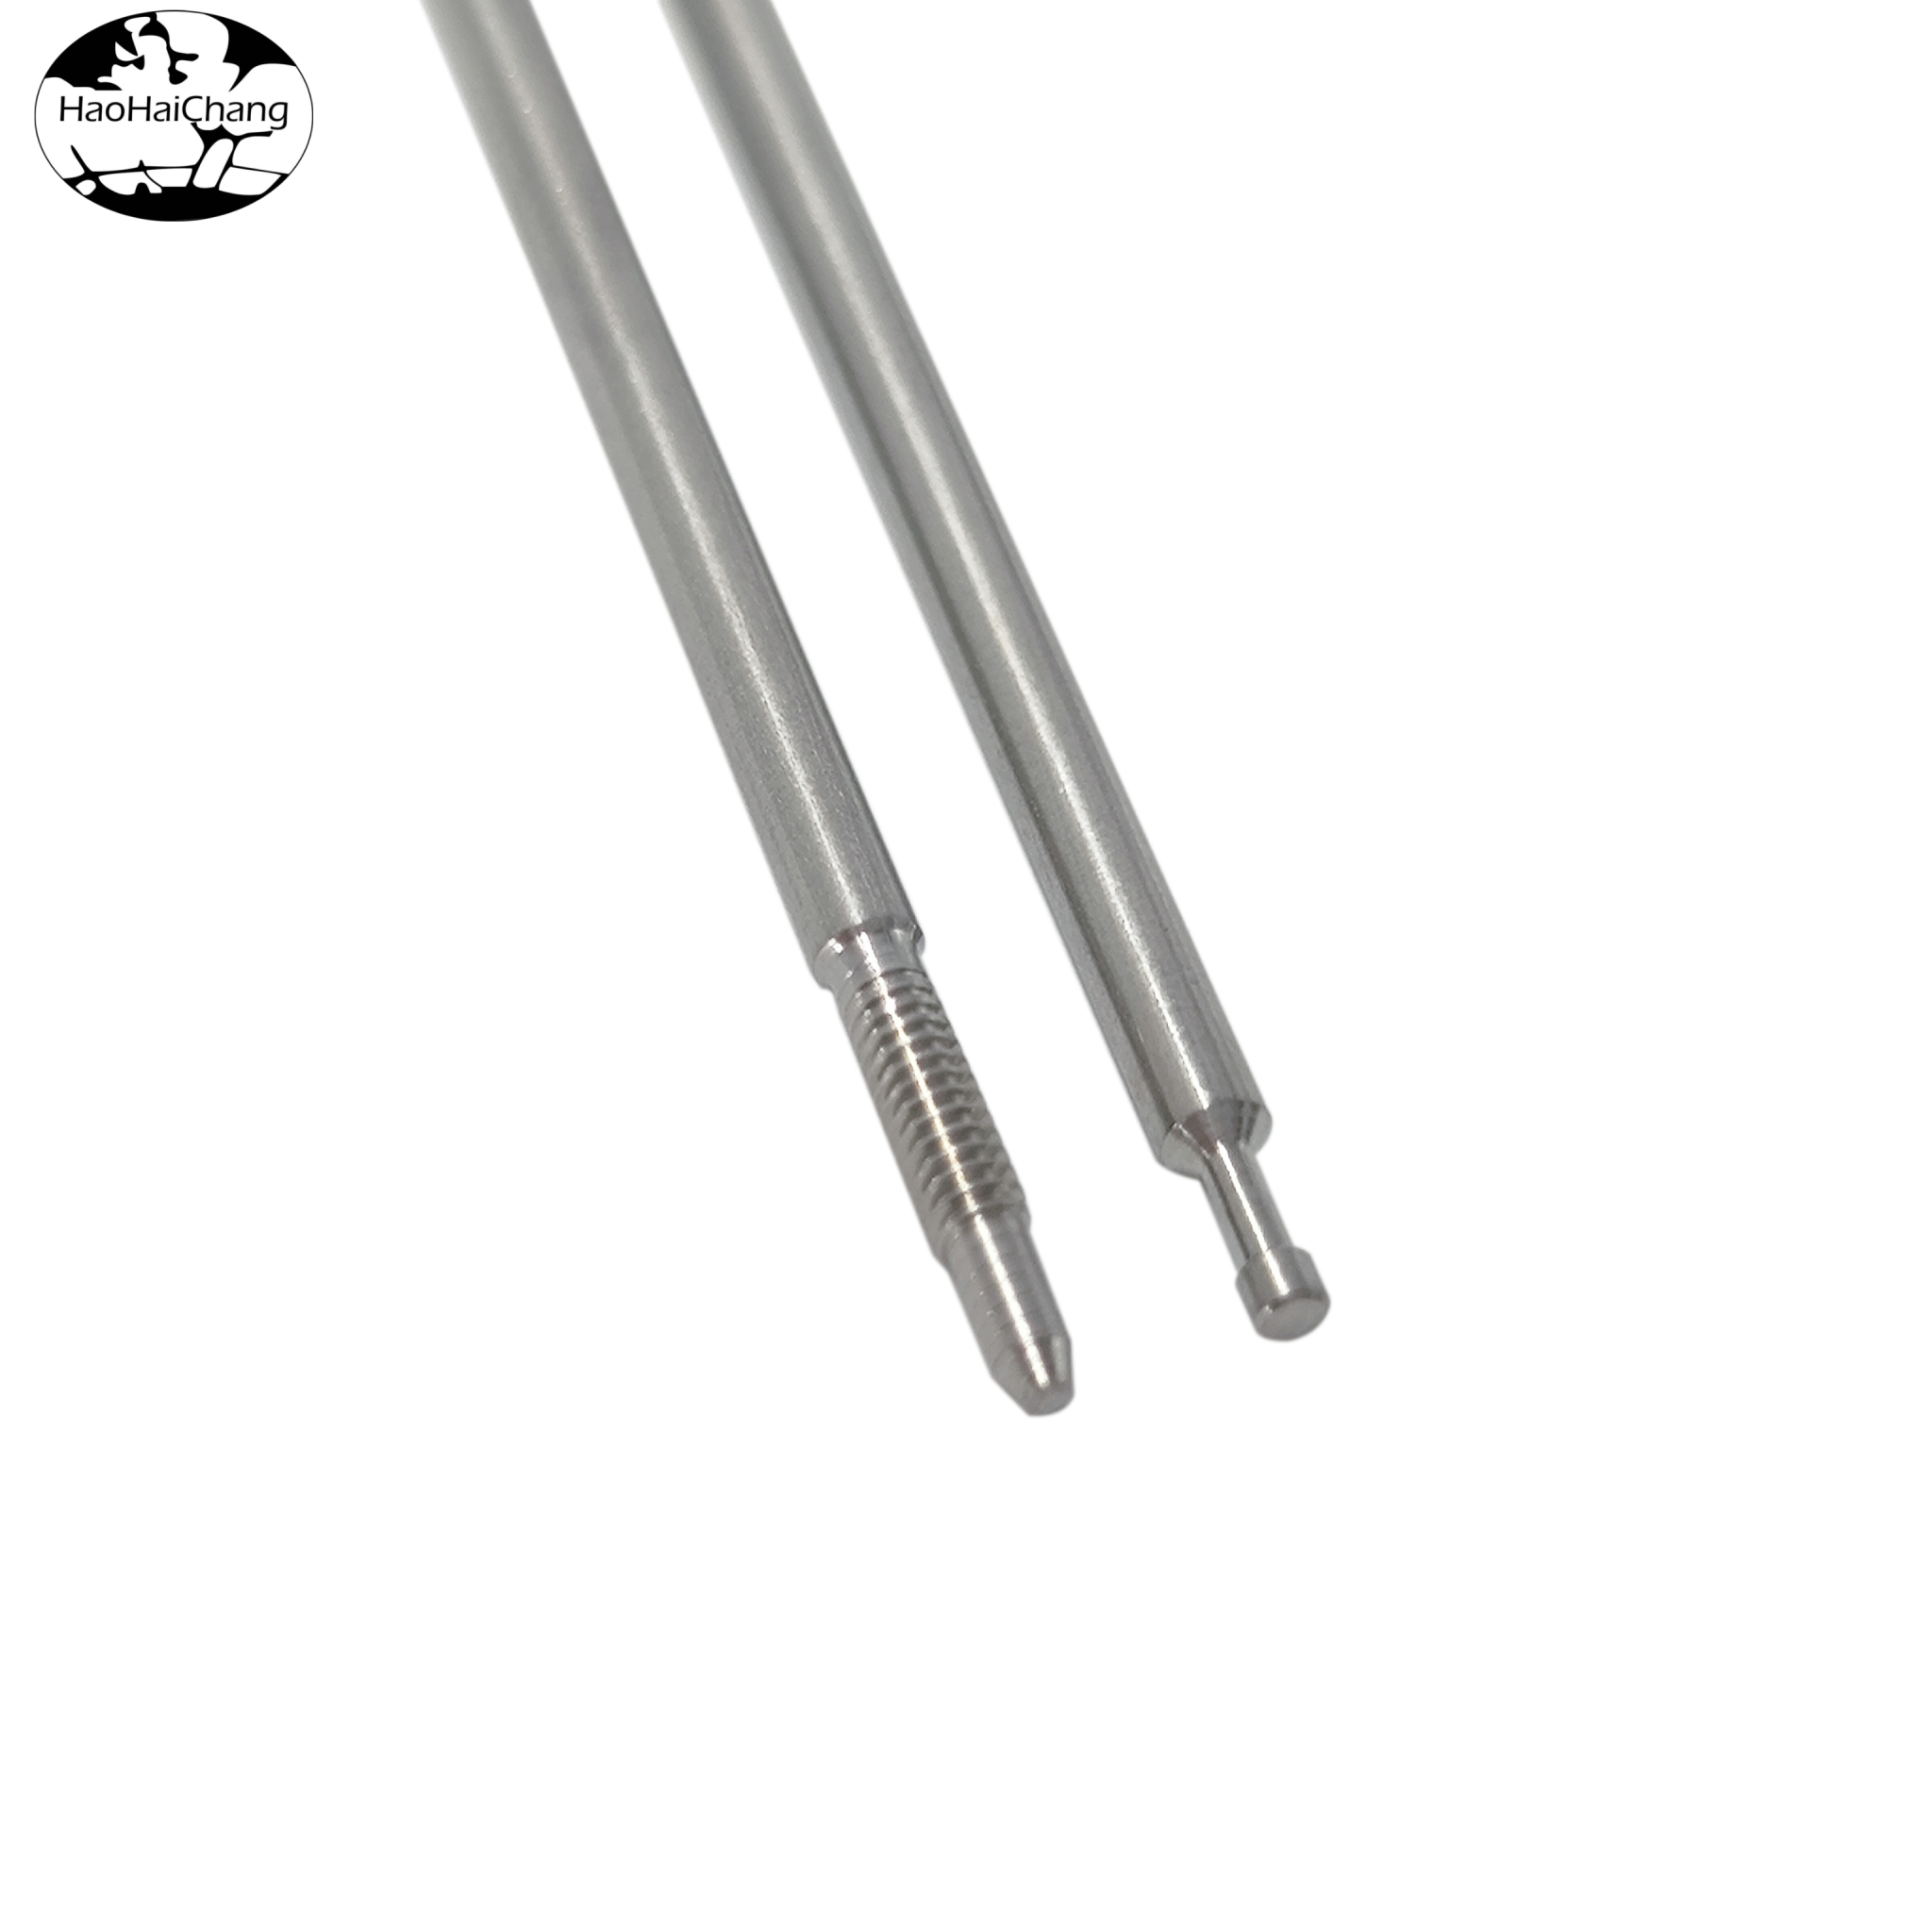 HHC-486 Stainless Steel Upper Lead Rod For Electric Heating Tube